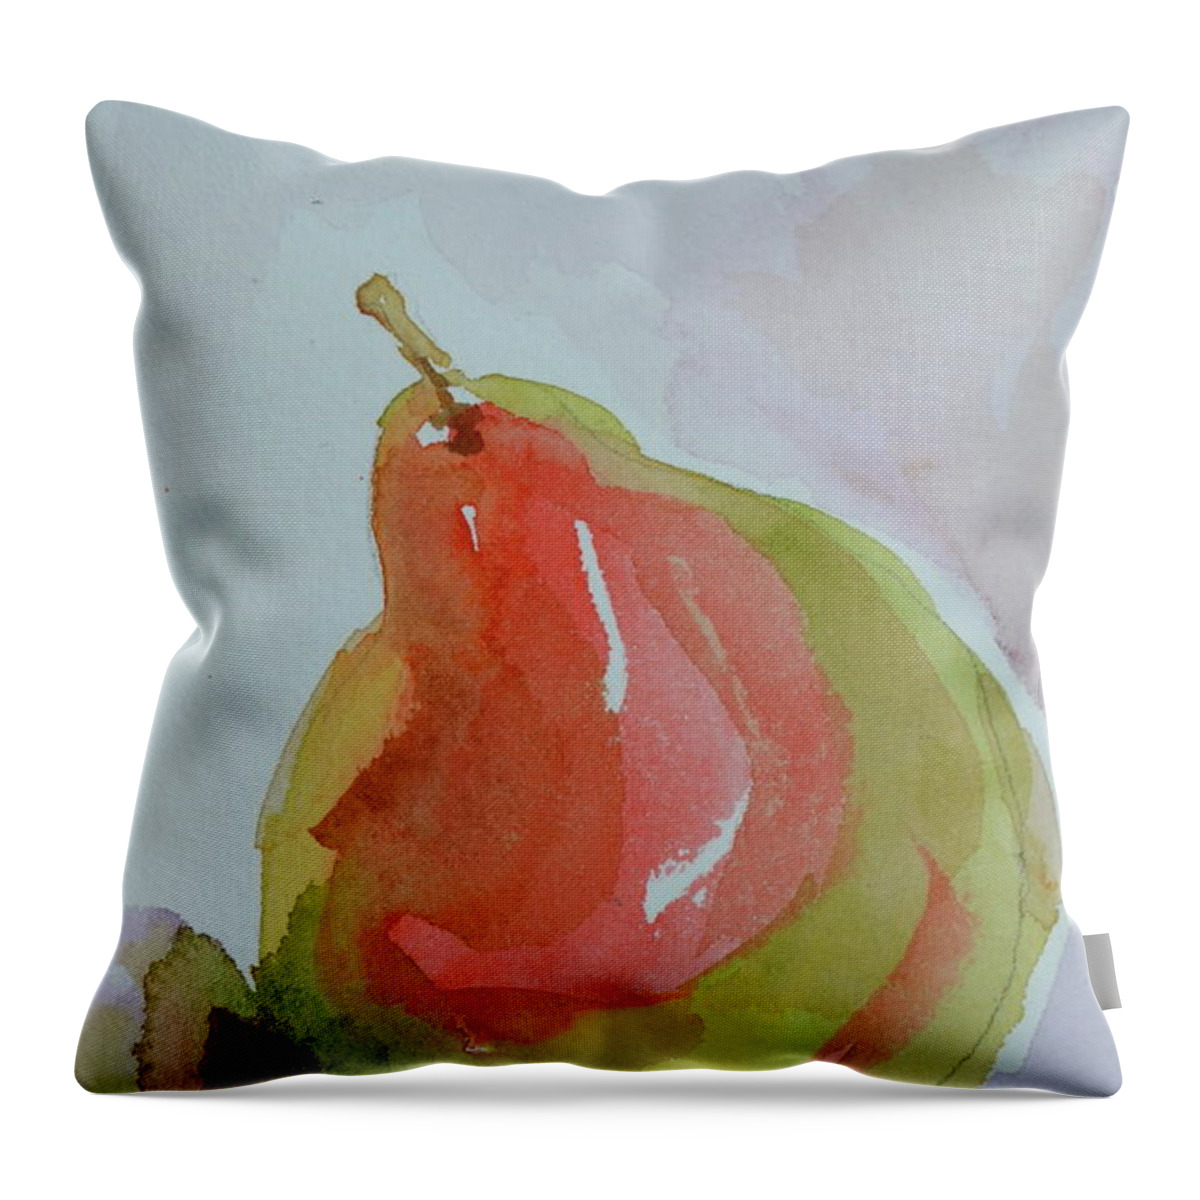 Pear Throw Pillow featuring the painting Simple Pear by Beverley Harper Tinsley